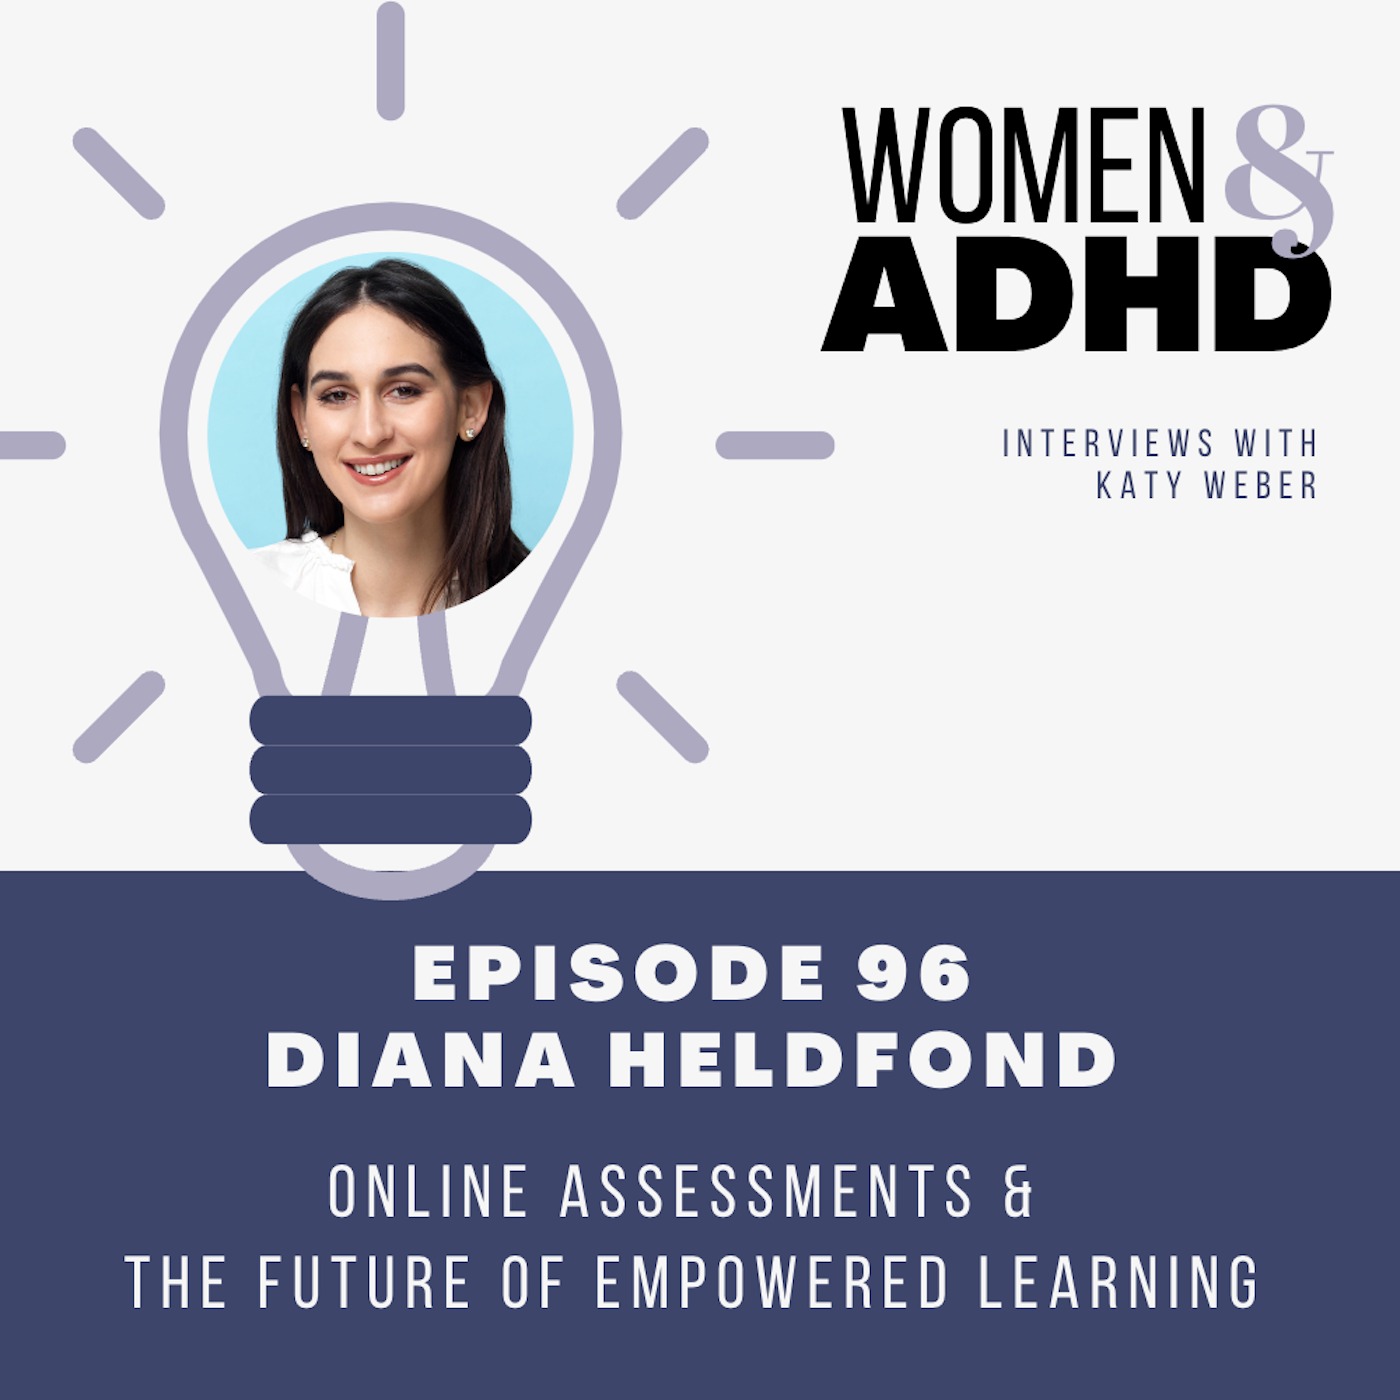 Diana Heldfond: Online assessments & the future of empowered learning